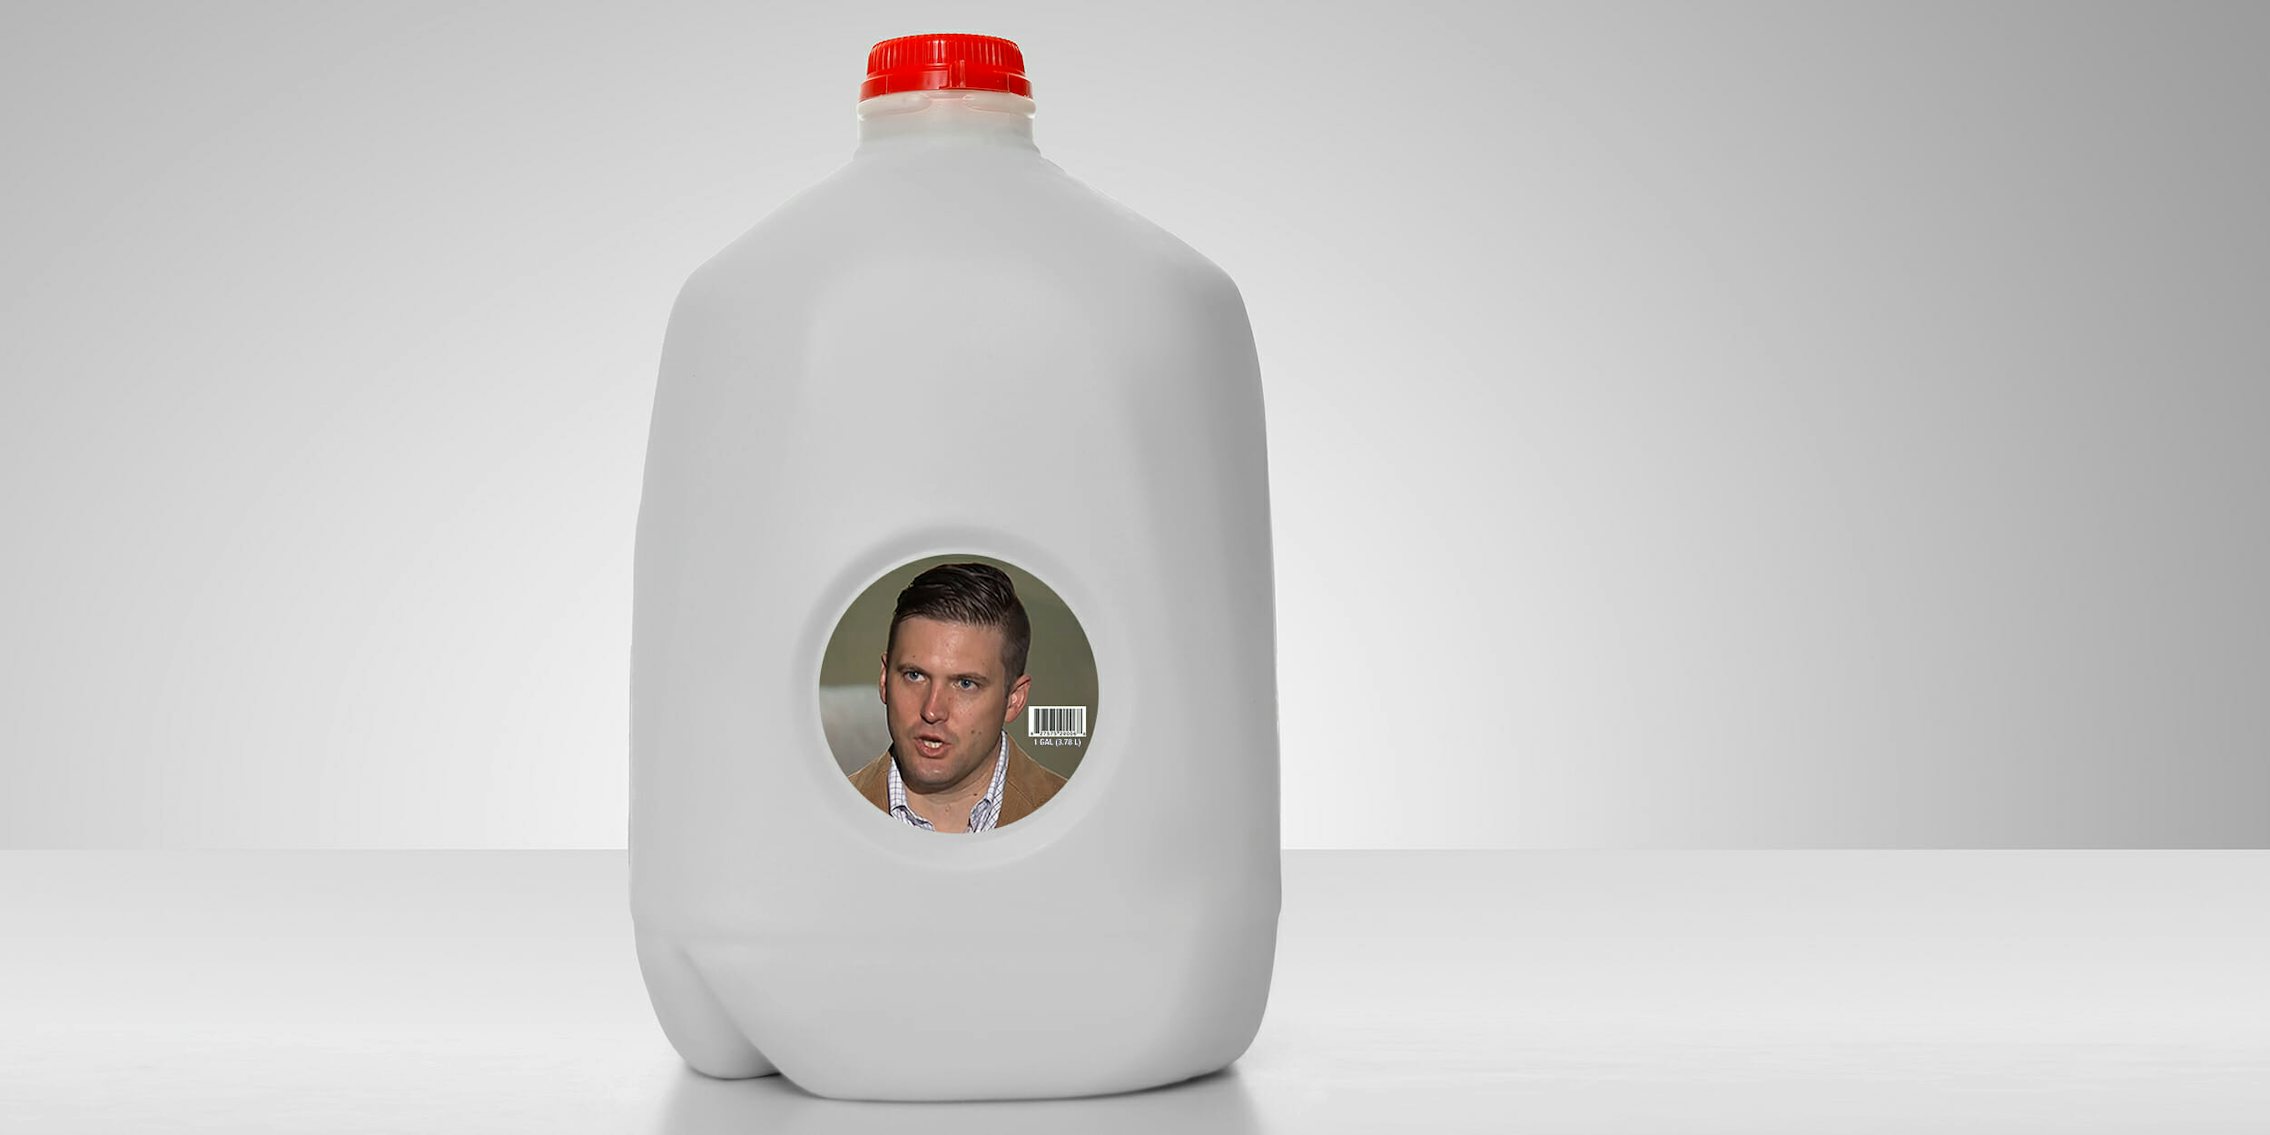 Richard Spencer on 1-gallon milk label. Here are 11 times the right owned themselves with a boycott, or other odd protests.